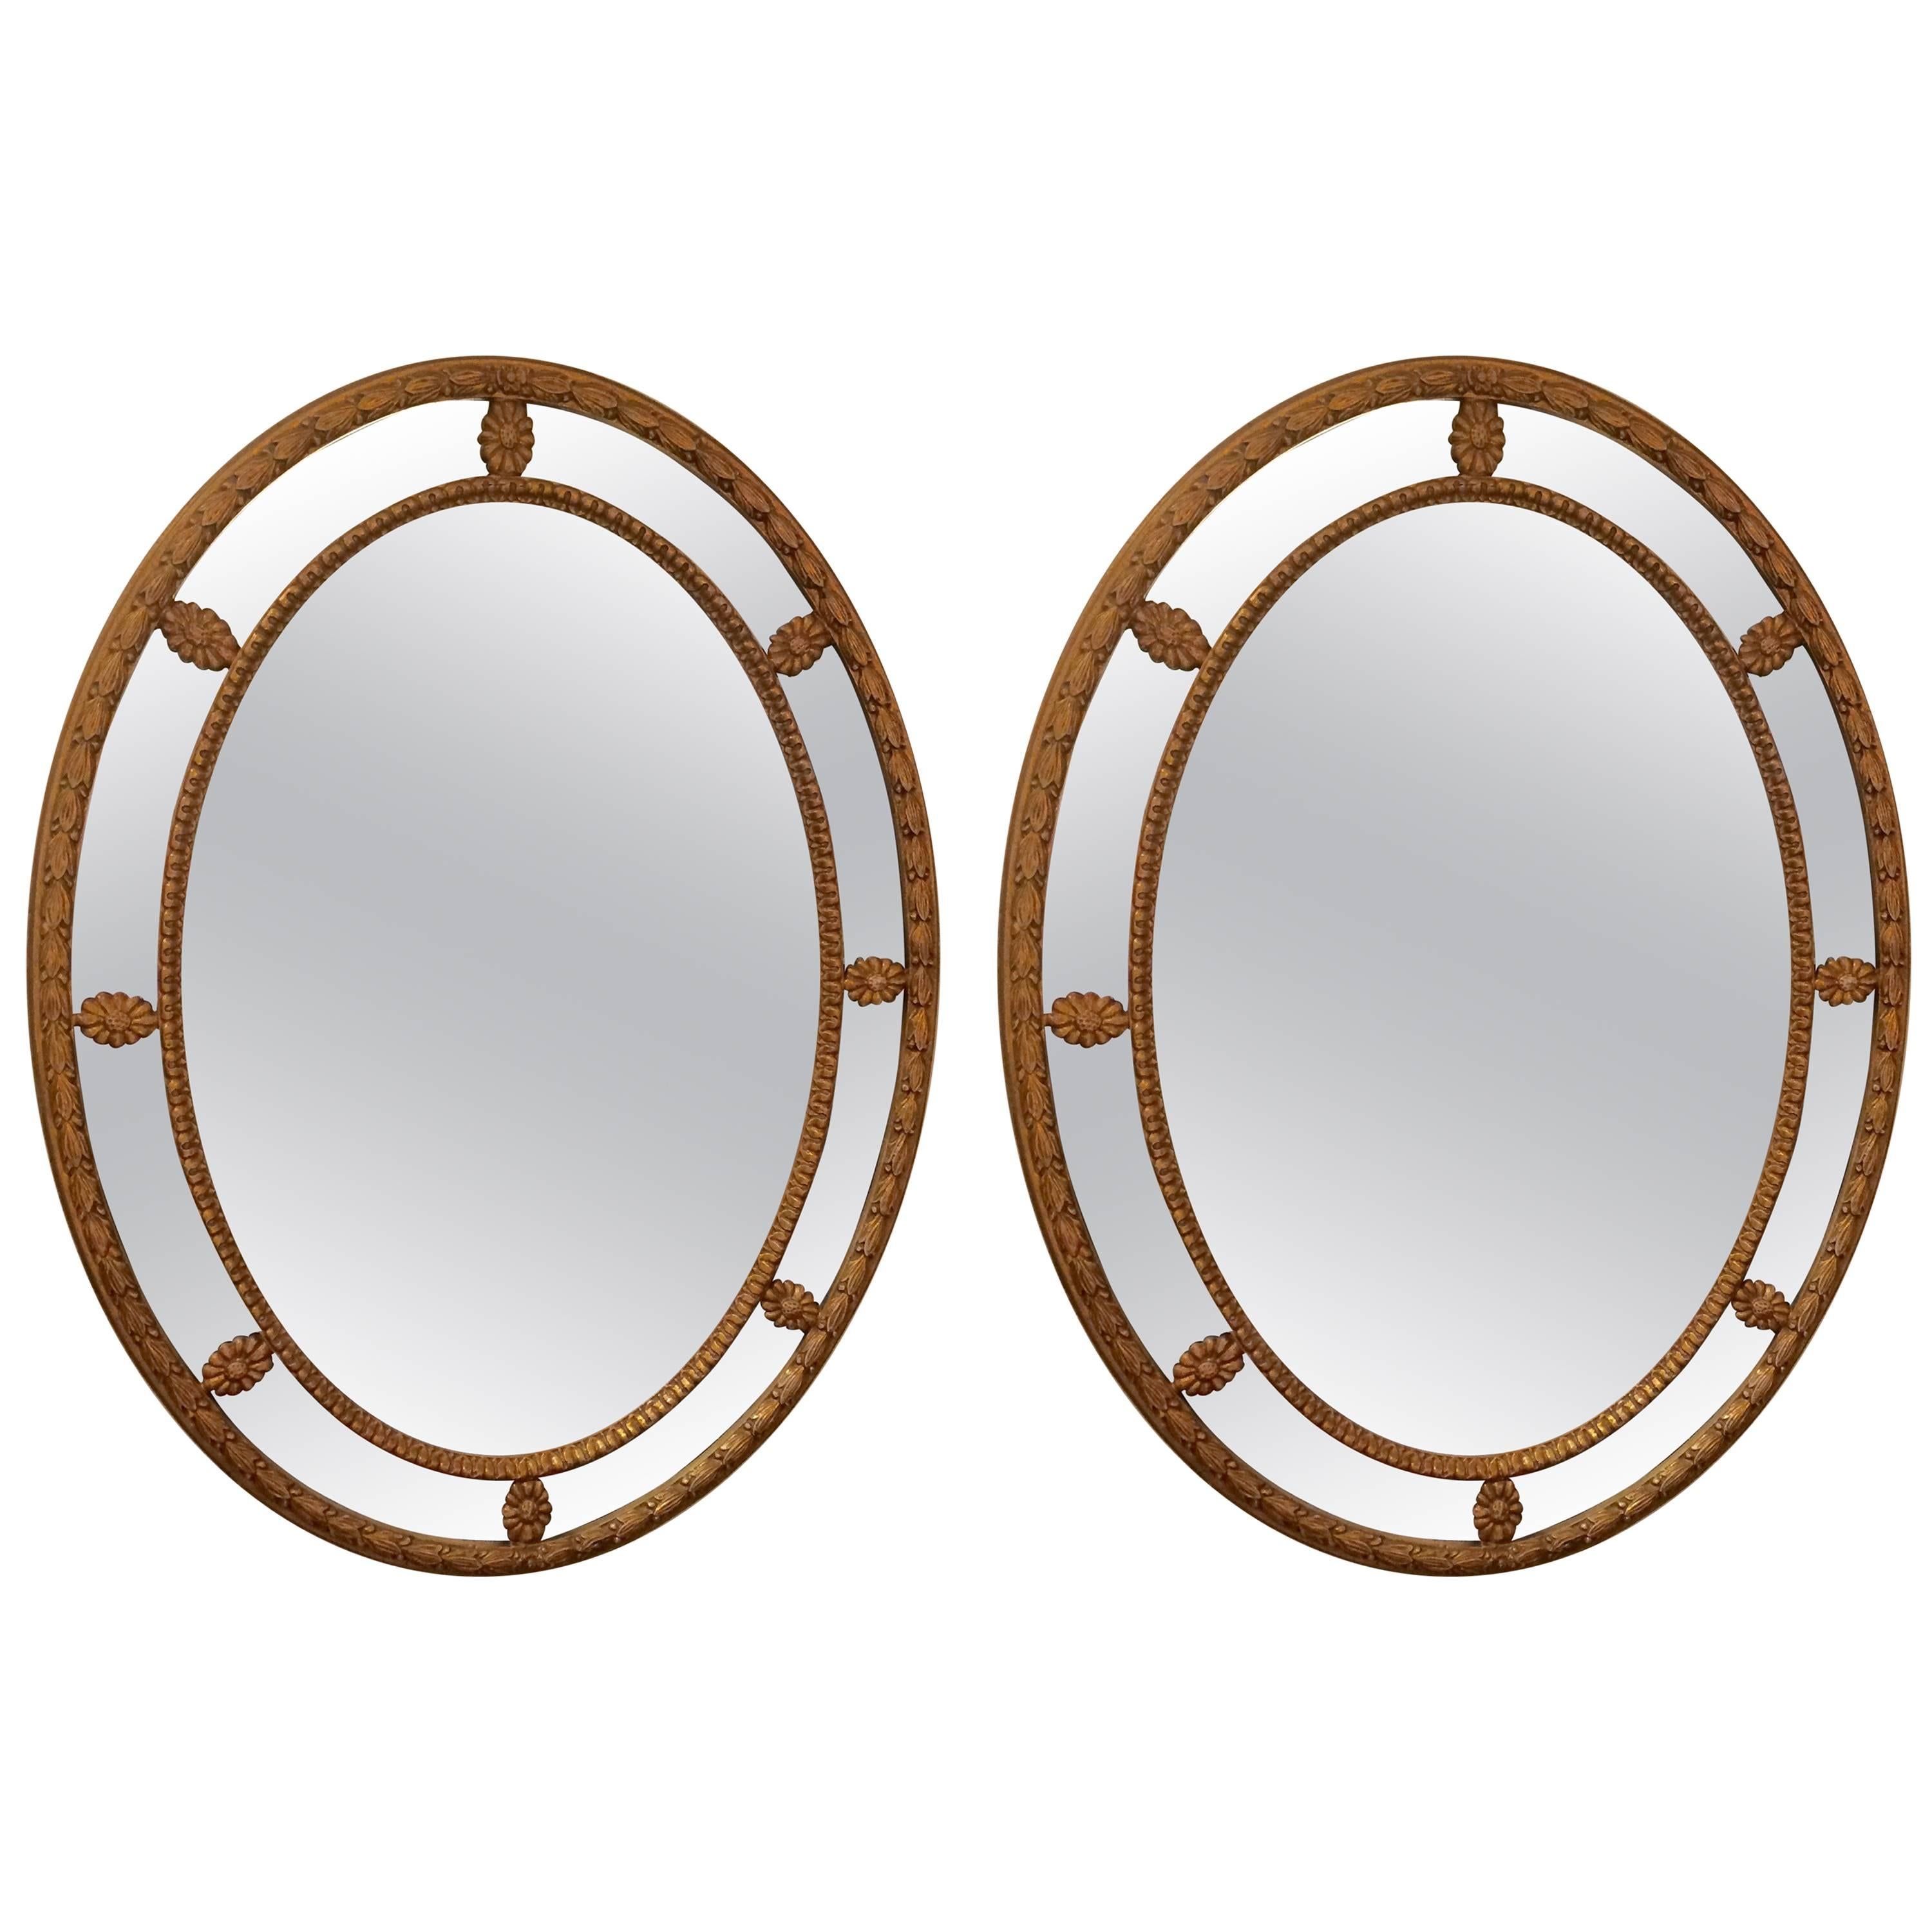 Classic Pair of Large Oval Italian Giltwood Mirrors